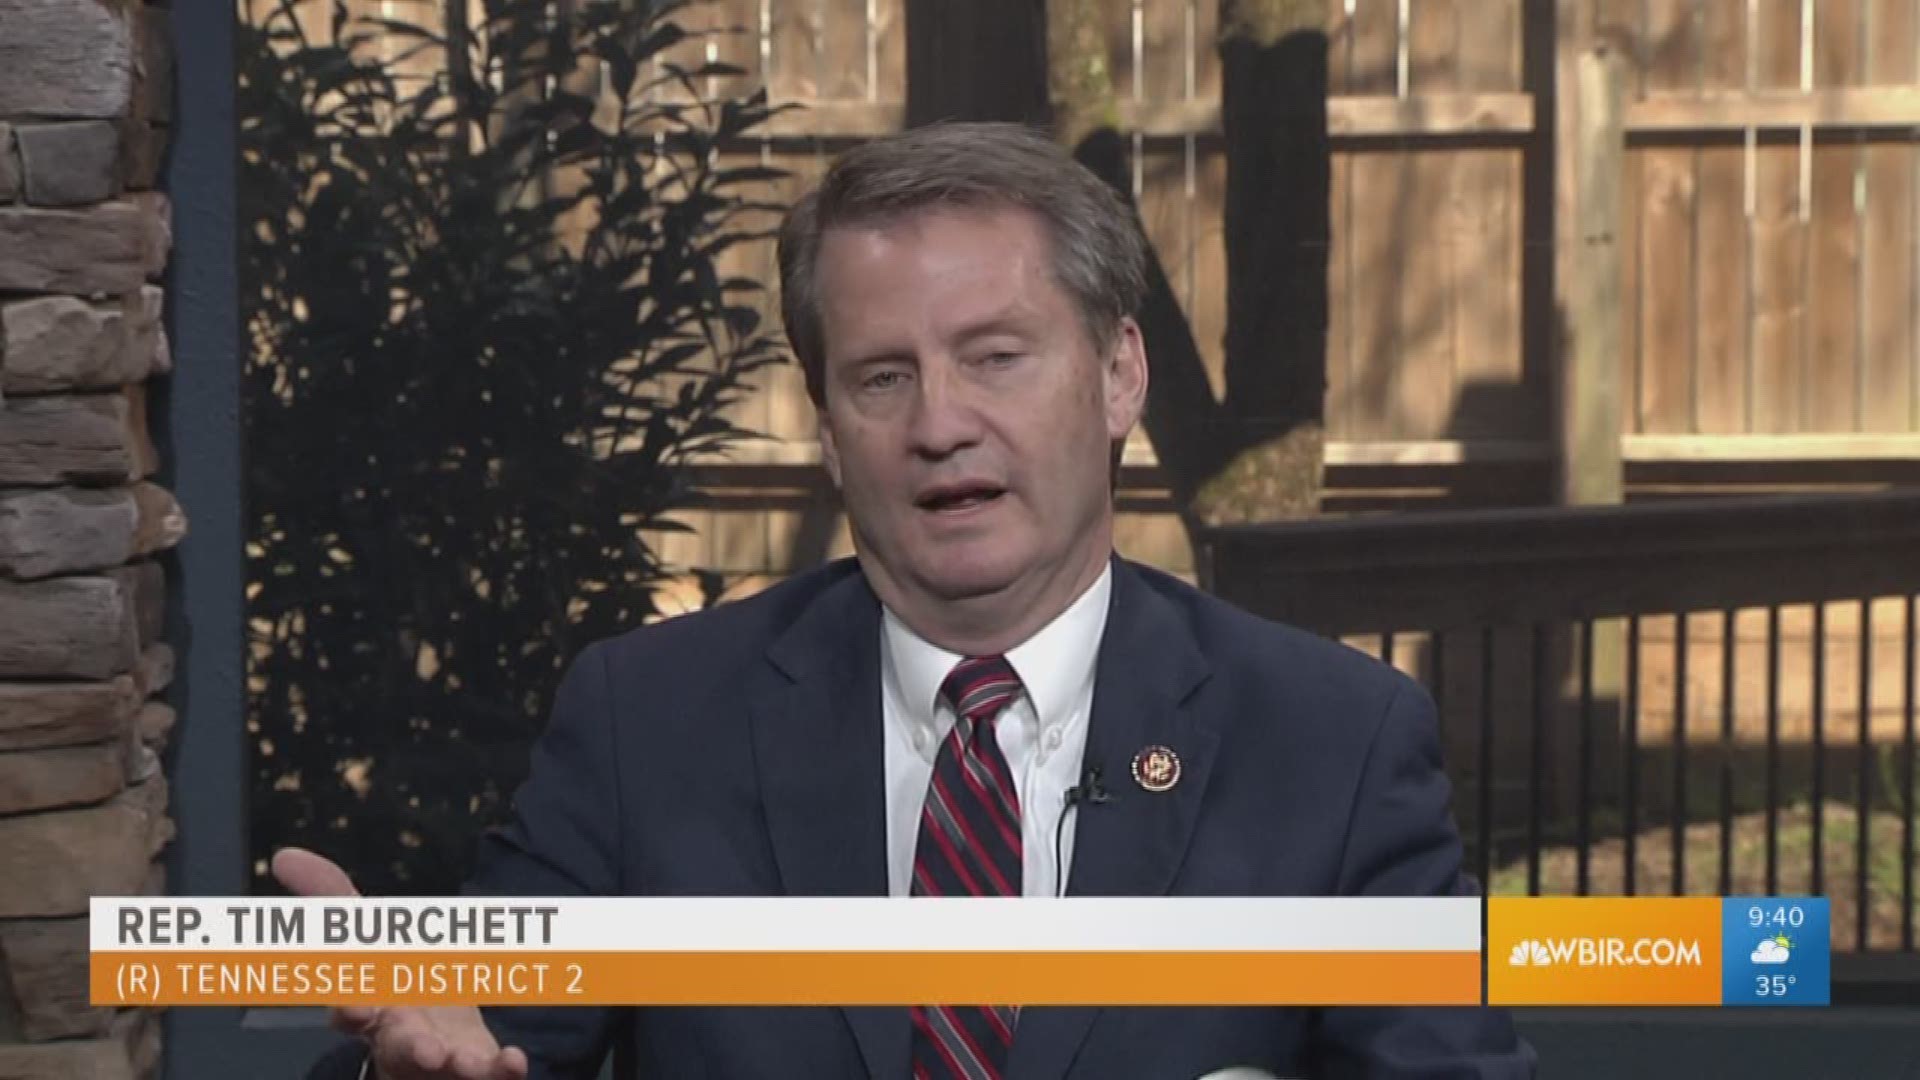 Things get a little tense as Inside Tennessee panelist Don Bosch confronts Rep. Burchett on a controversial selfie he had shared to his social media account.